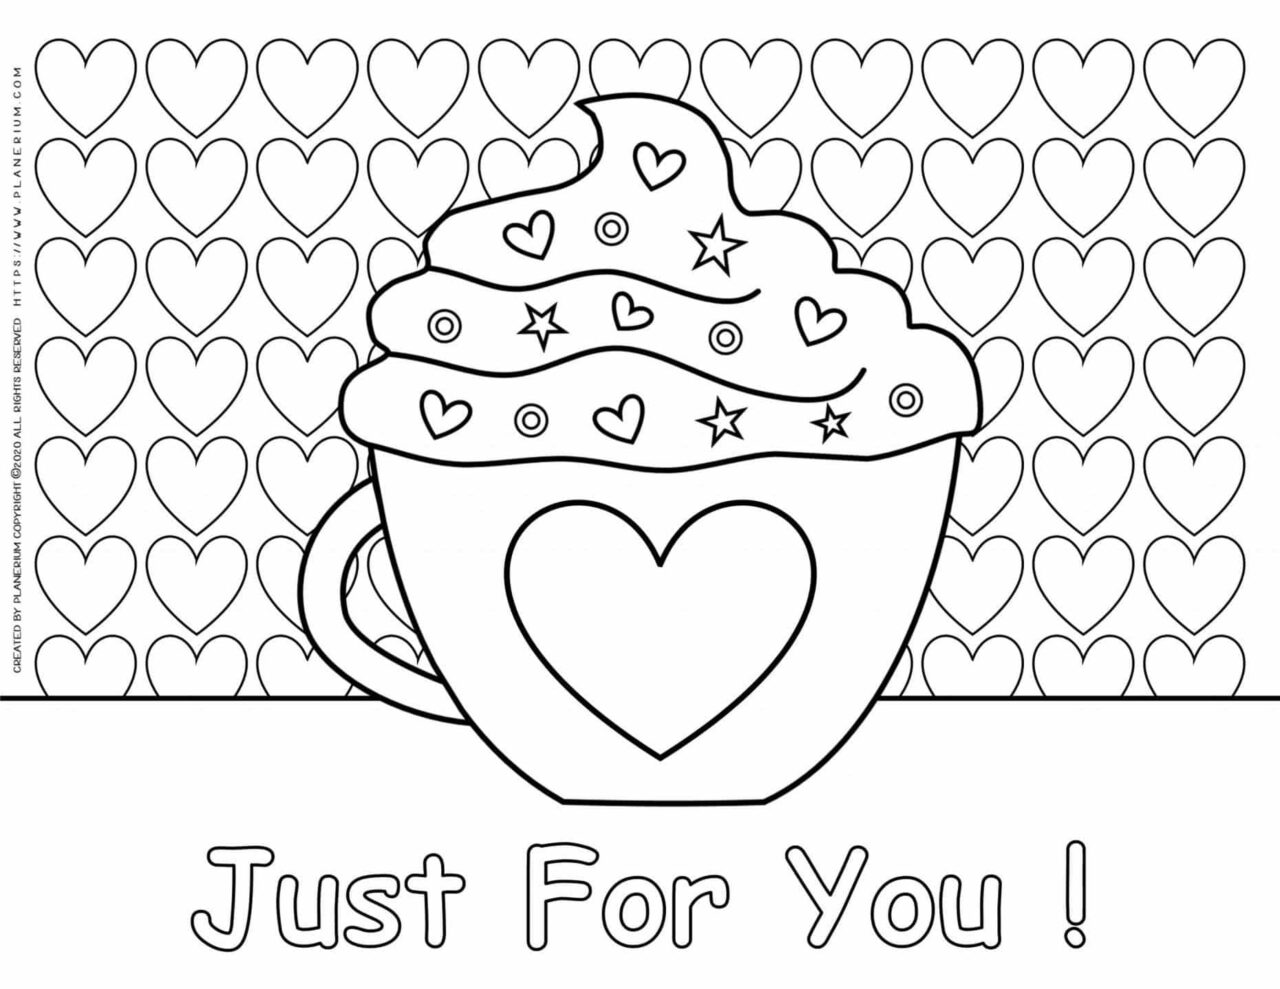 Valentines Day Coloring Page Heart Mug